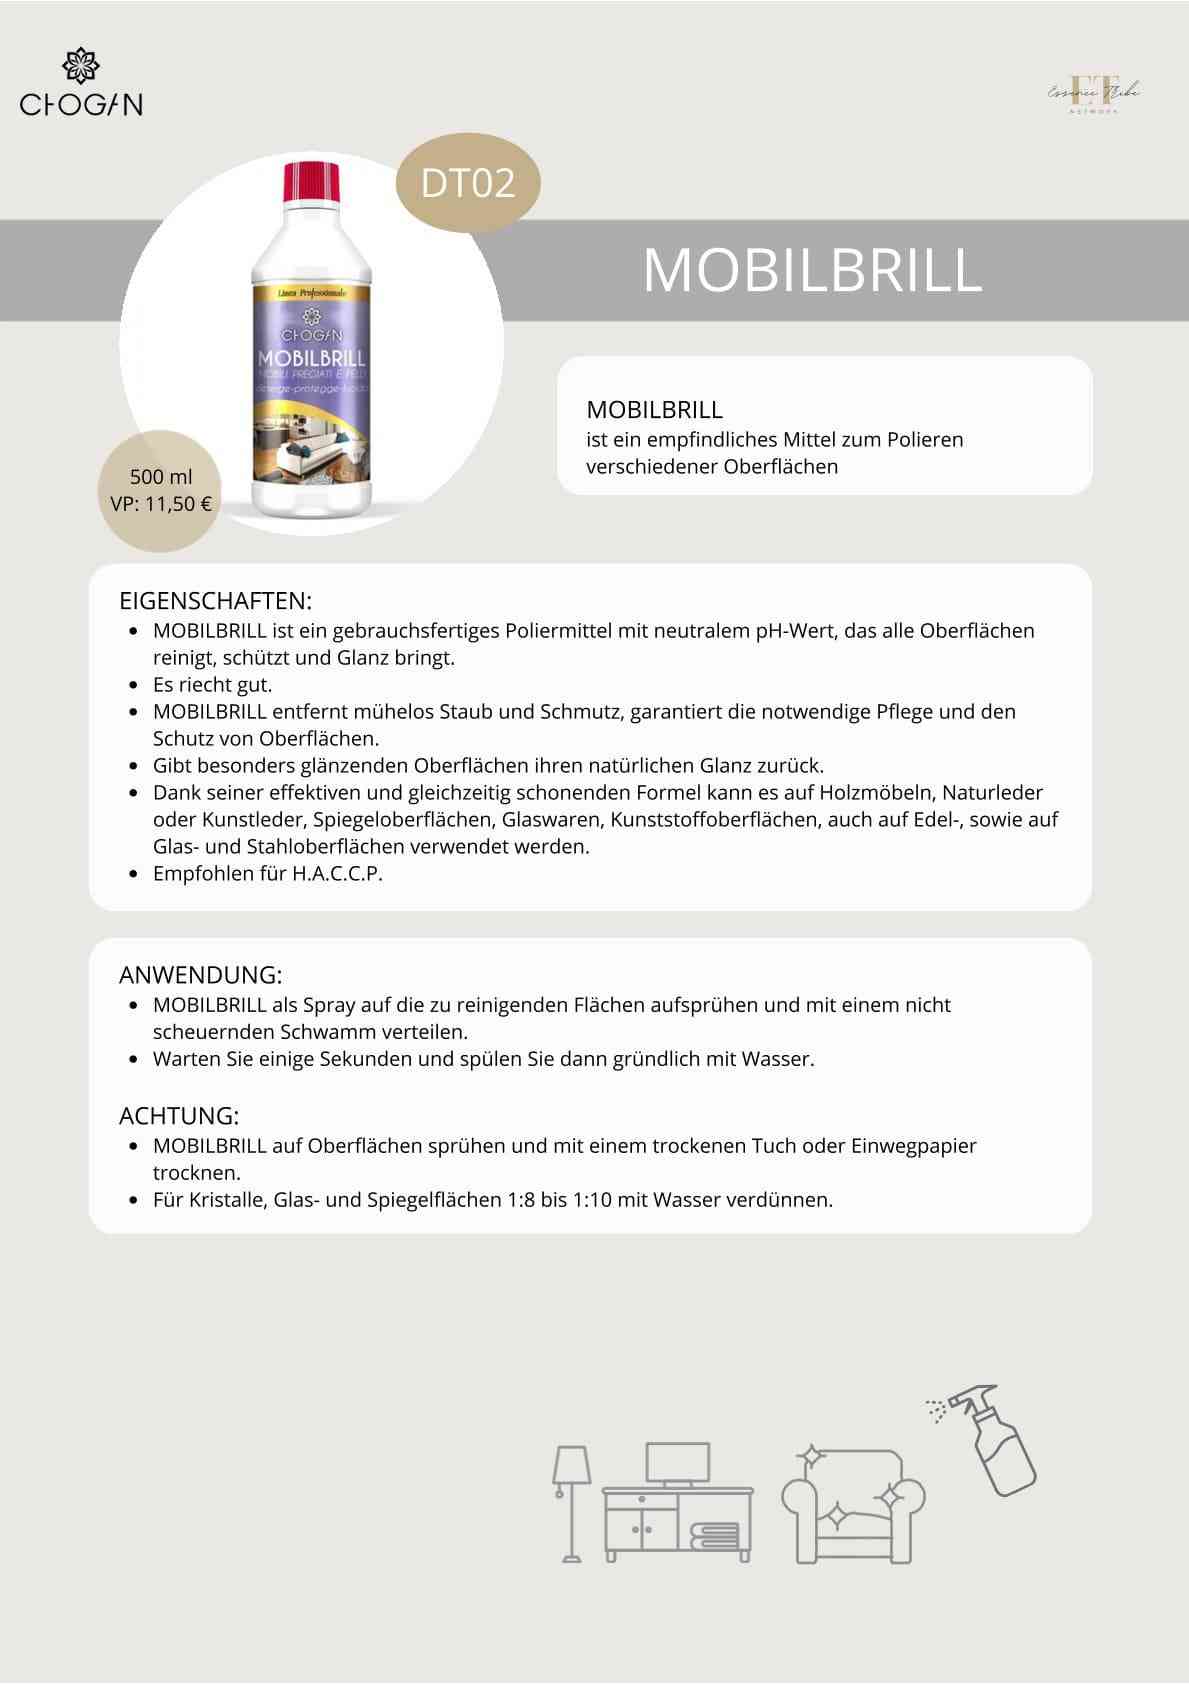 MOBILBRILL gentle multi-surface cleaner with polishing effect